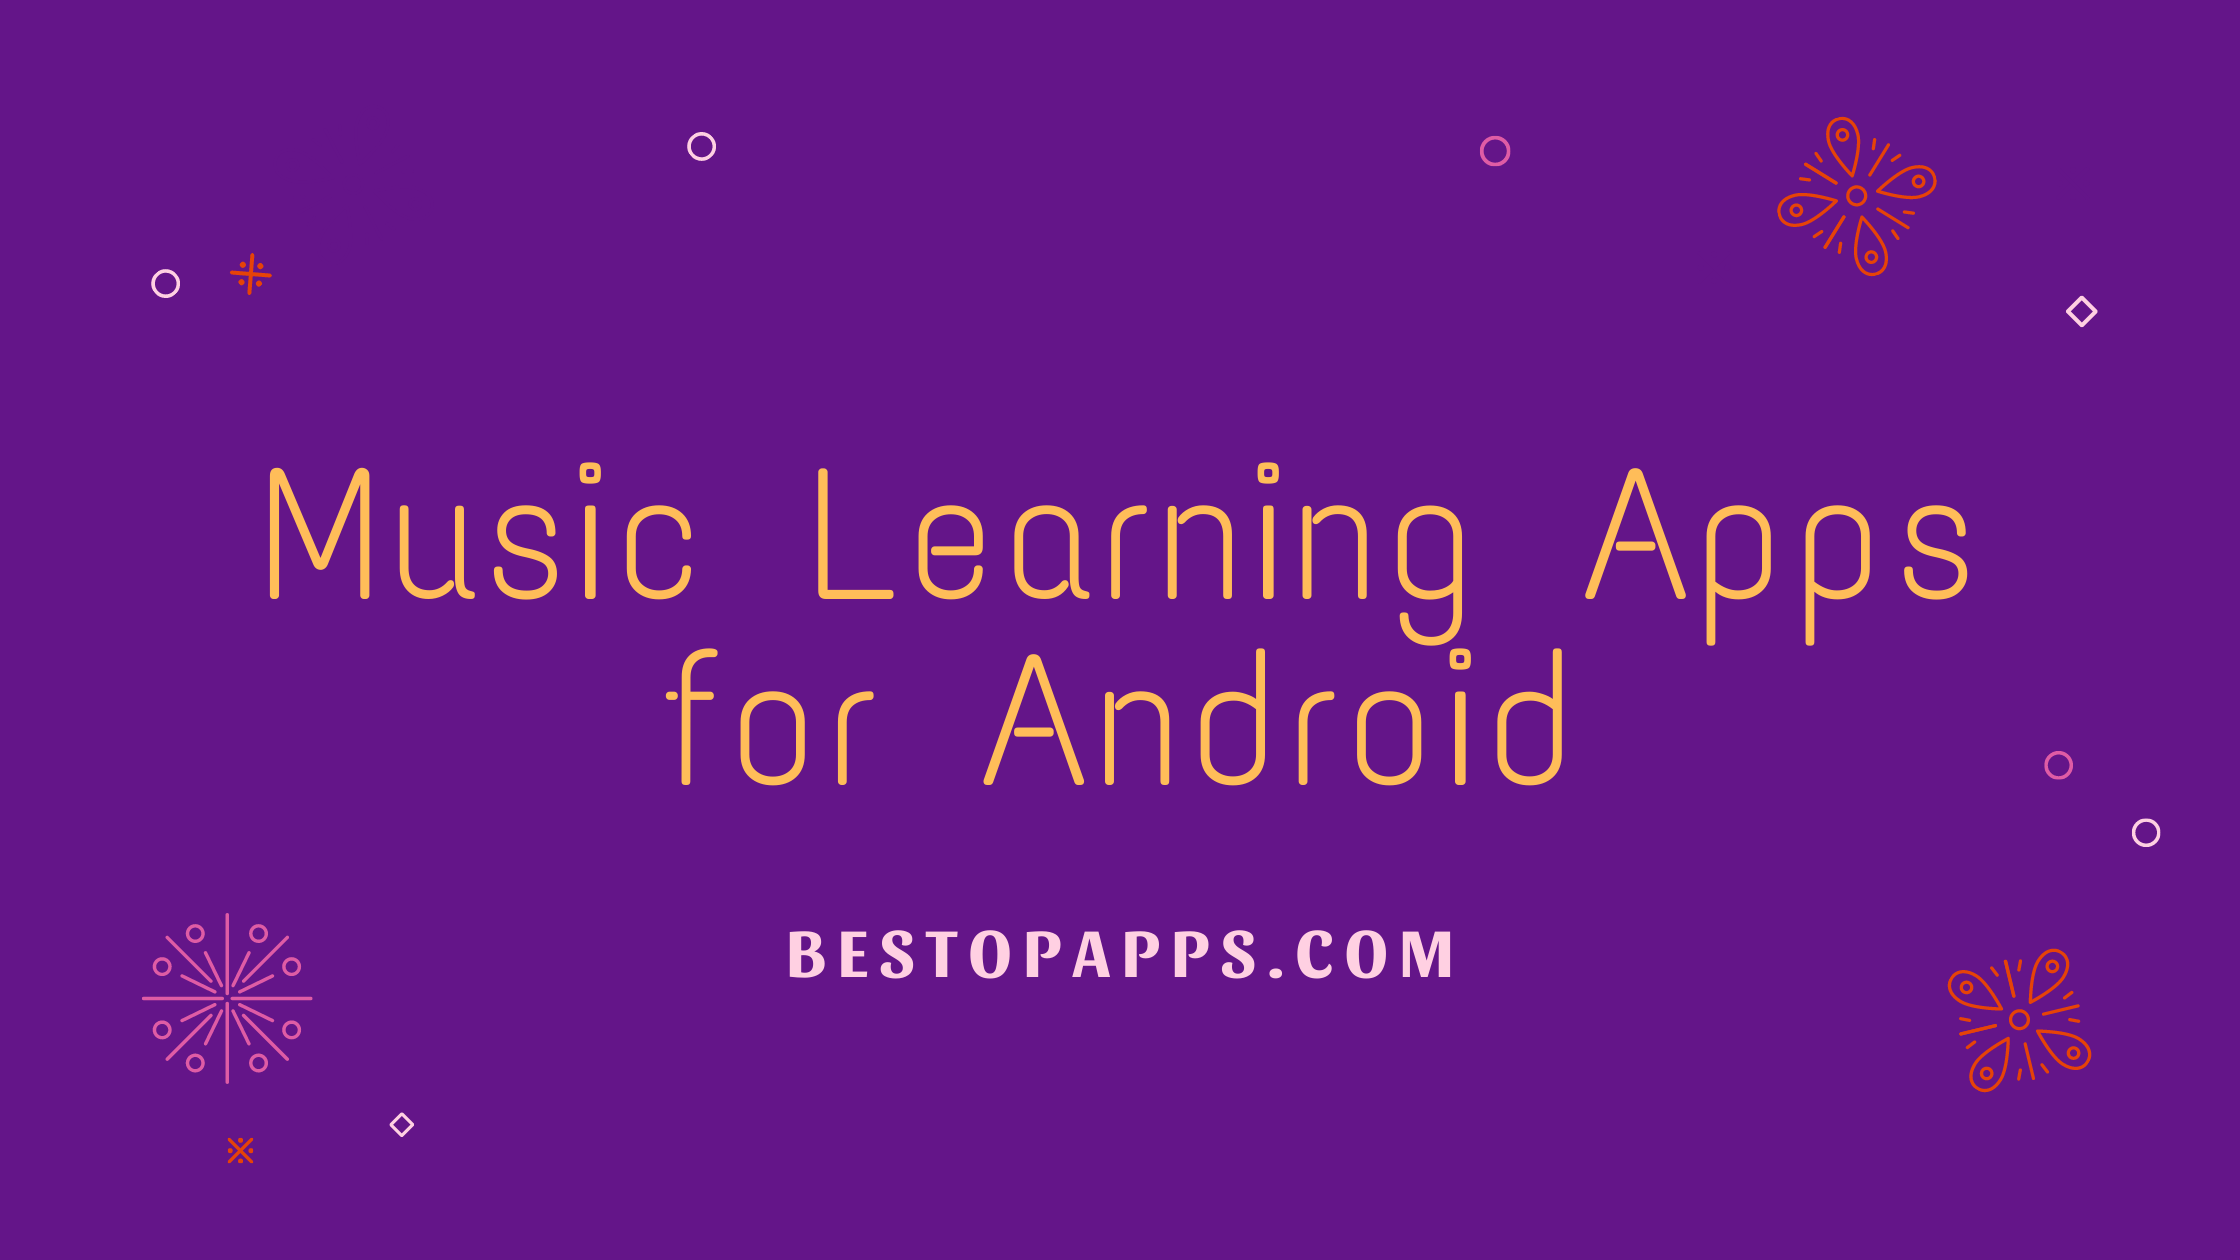 Music Learning Apps for Android